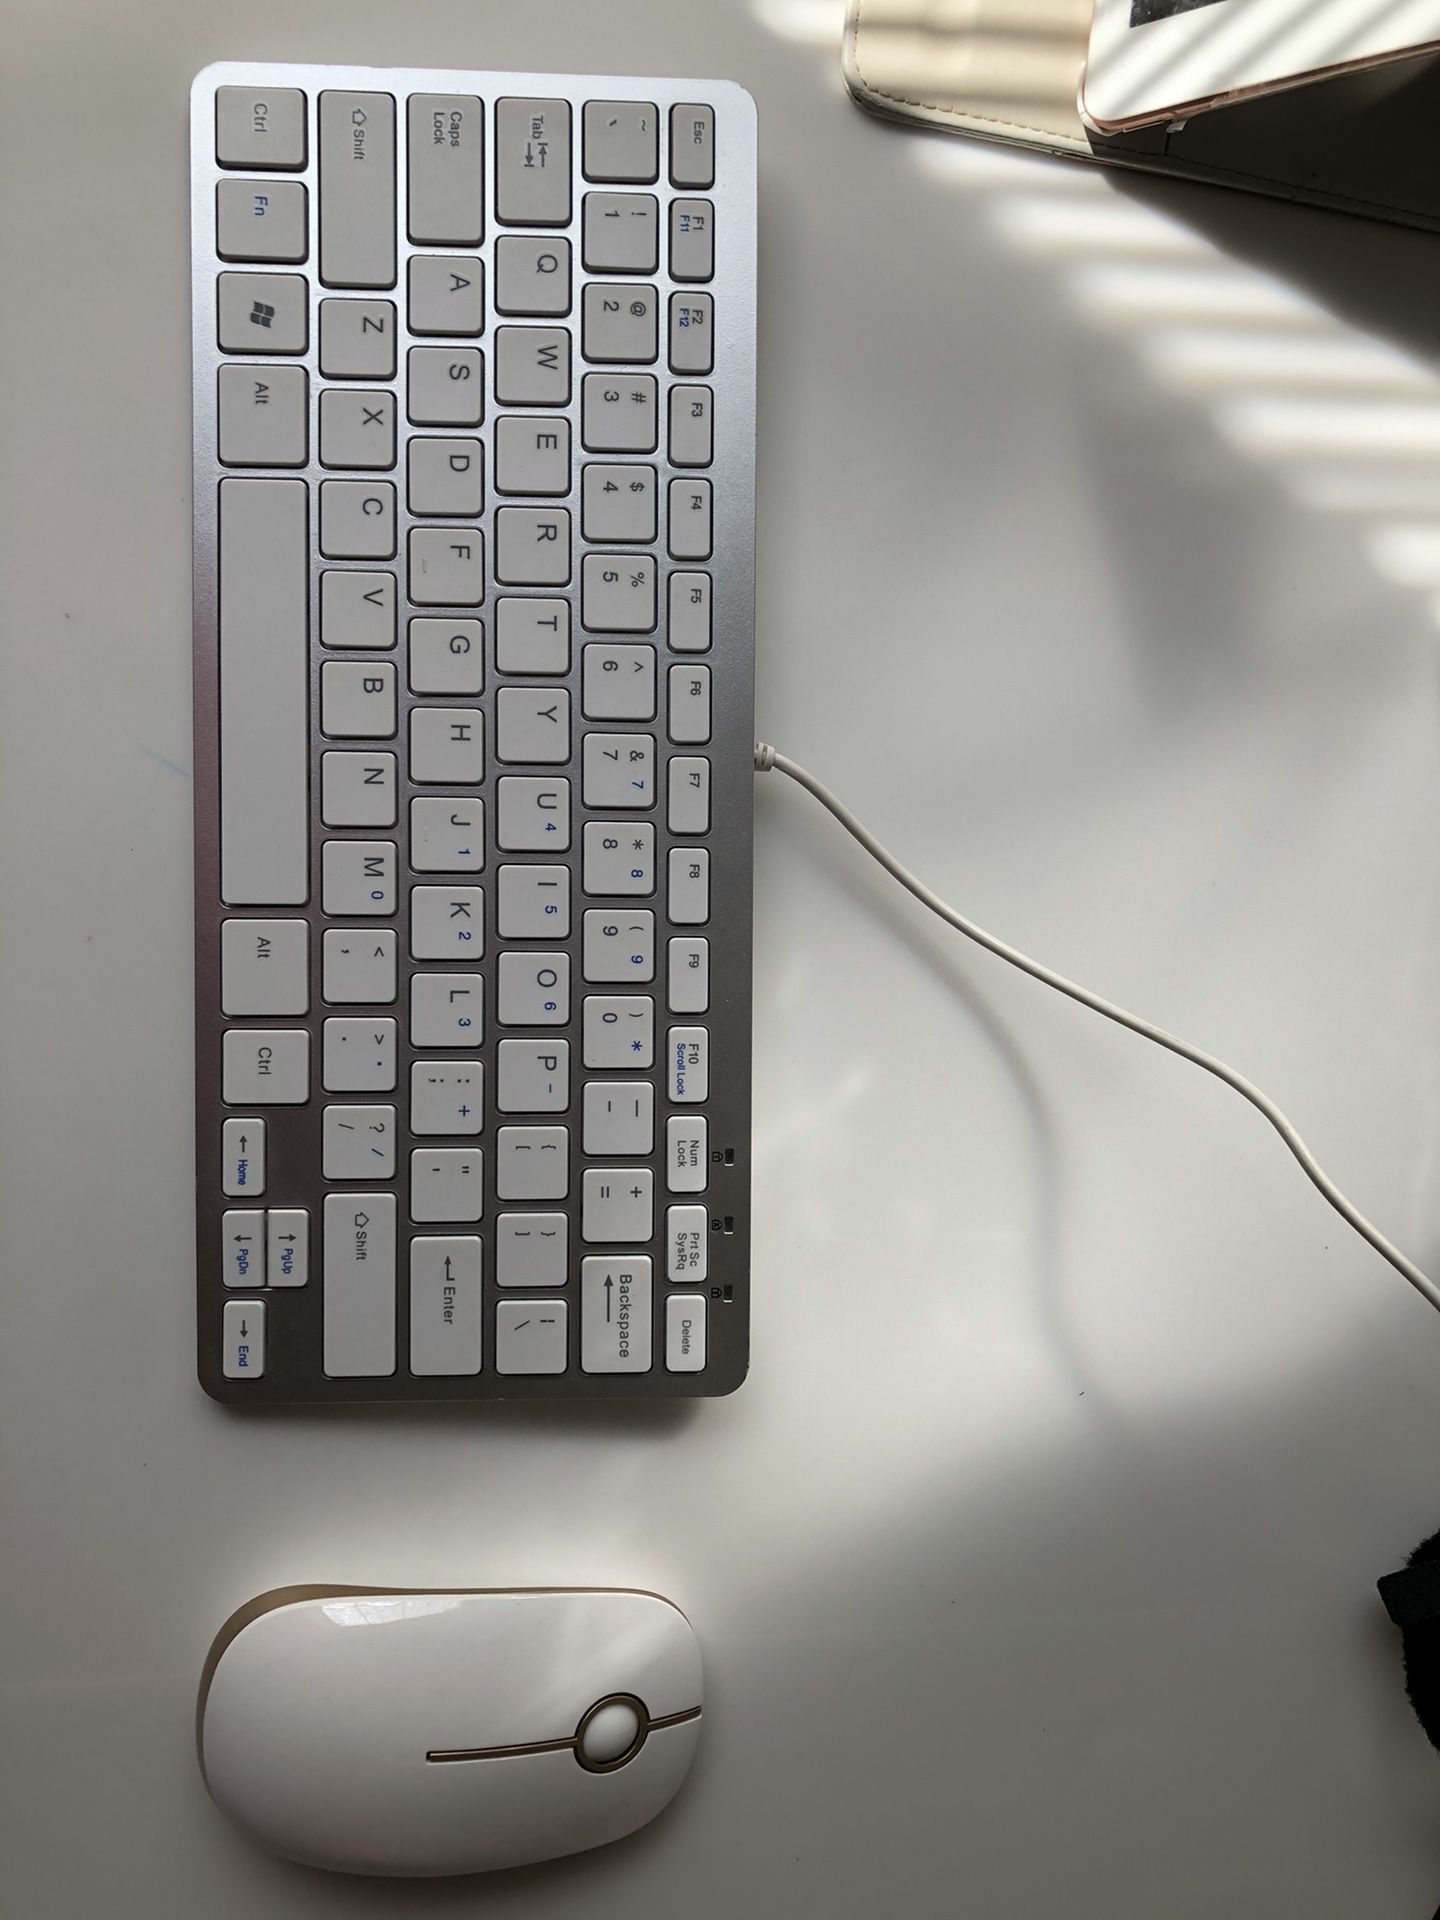 White silver Keyboard & marching wireless mouse